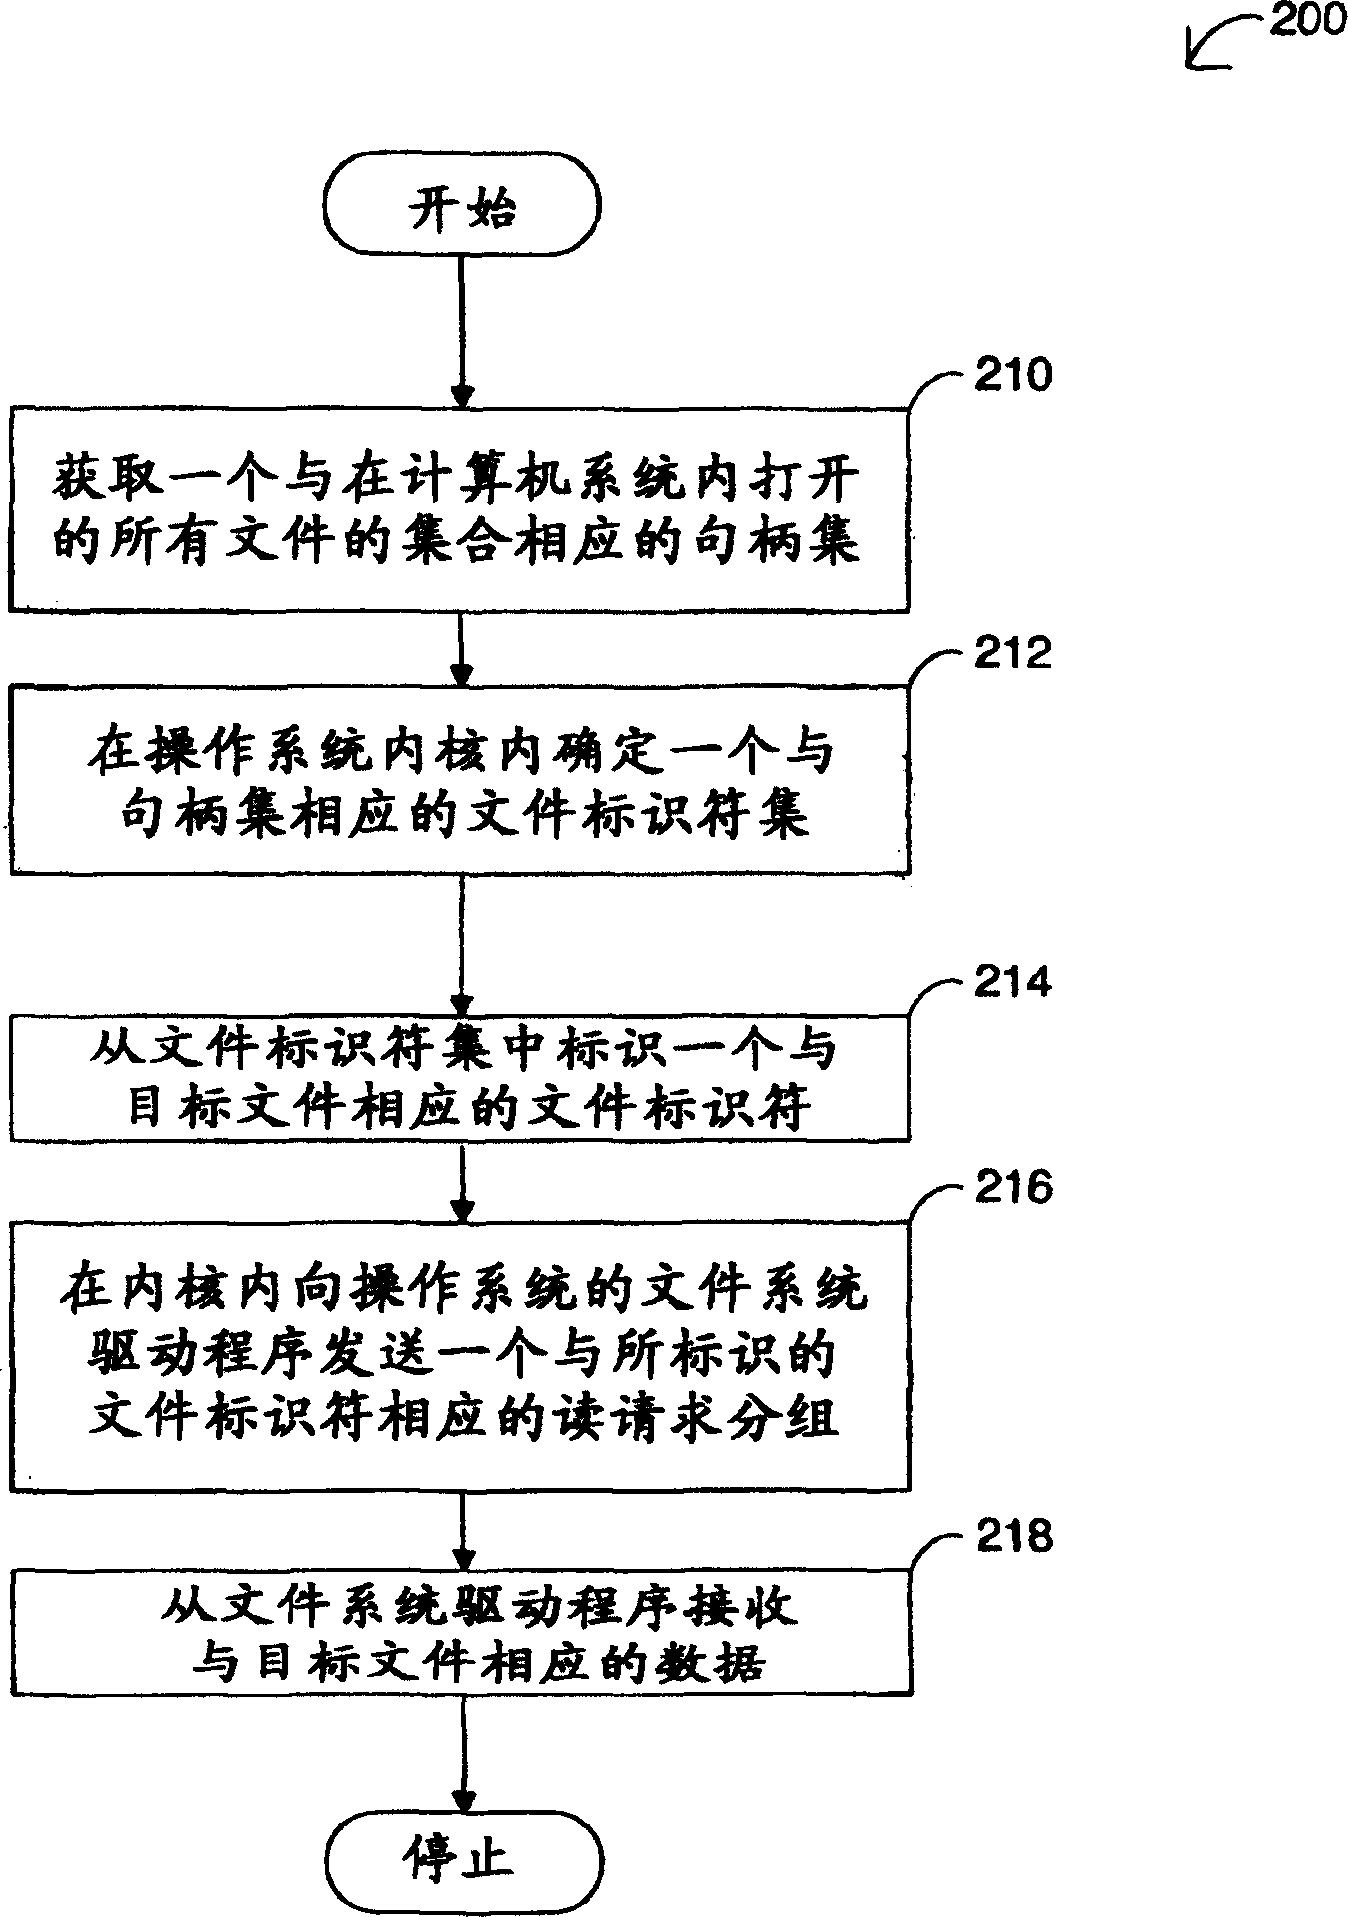 Method and system of accessing at least one target file in a computer system